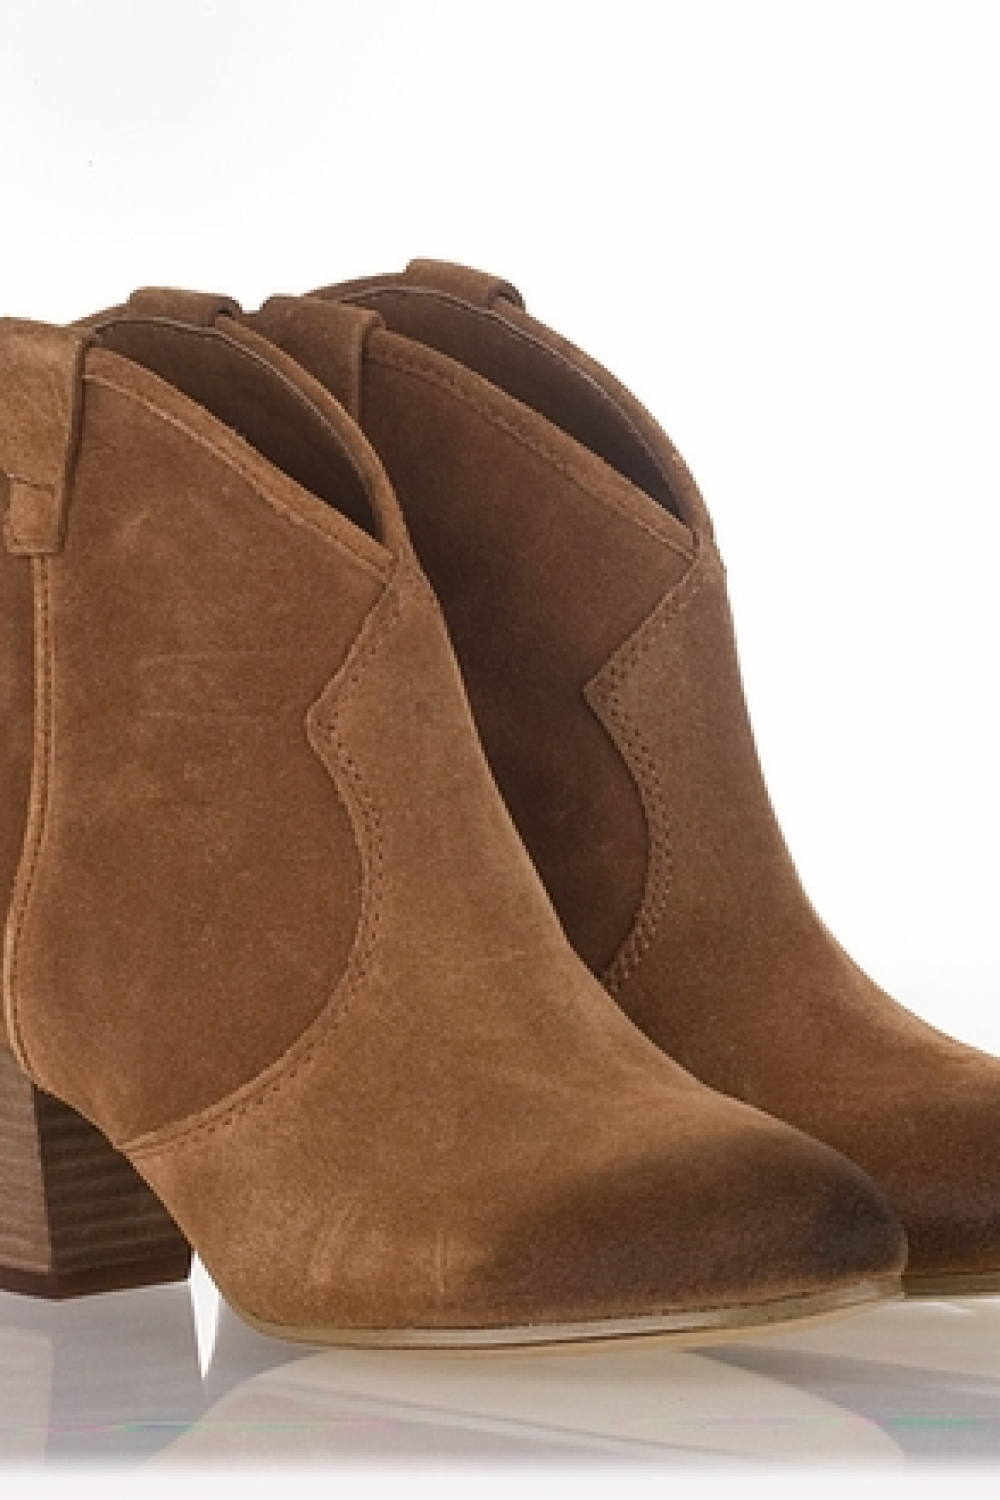 Trend Alert! Suede Ankle Boots